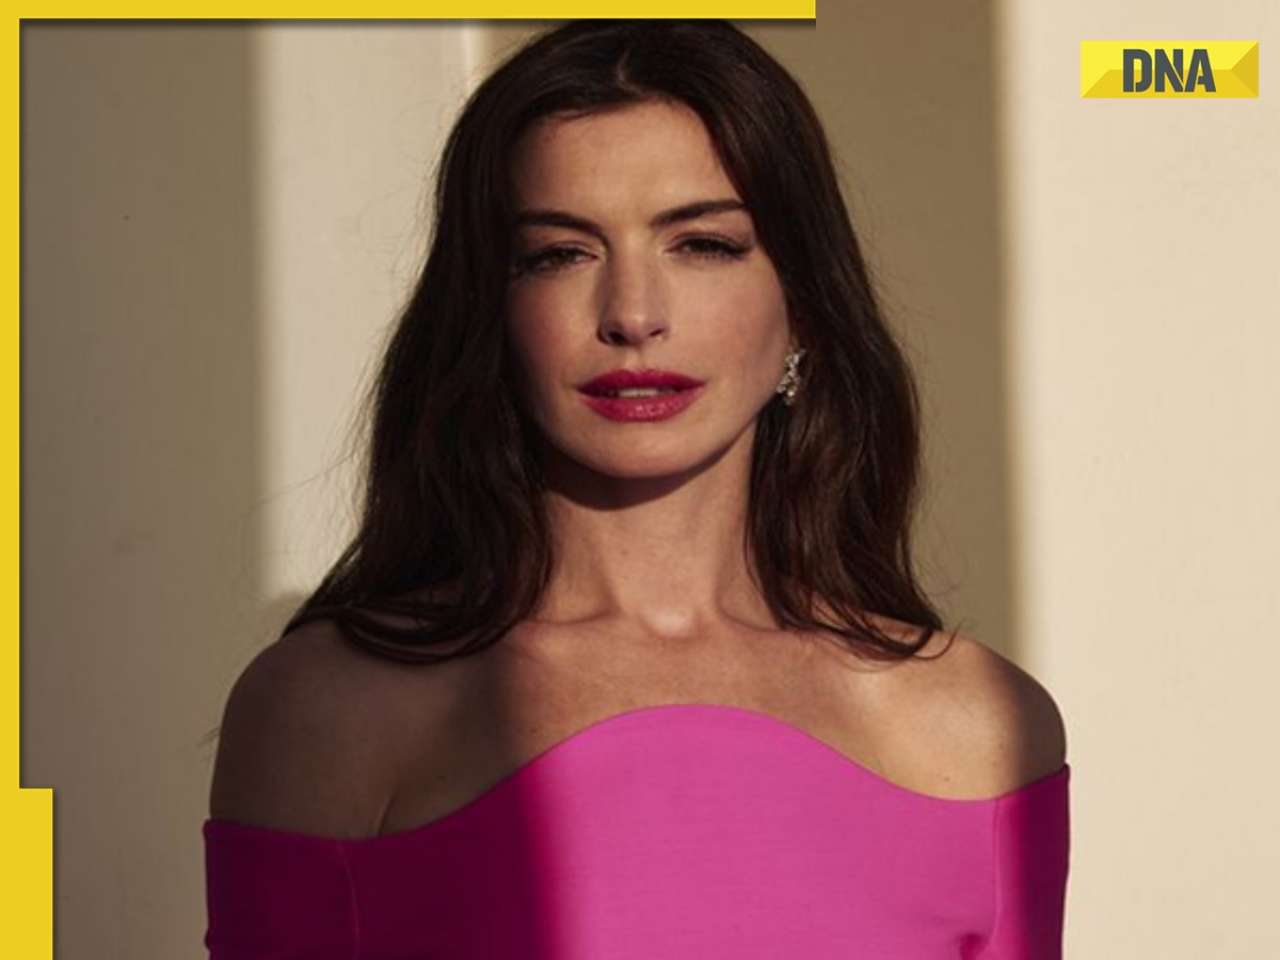 Anne Hathaway recalls 'gross' audition when she had to make out with 10 men: 'It was very...'